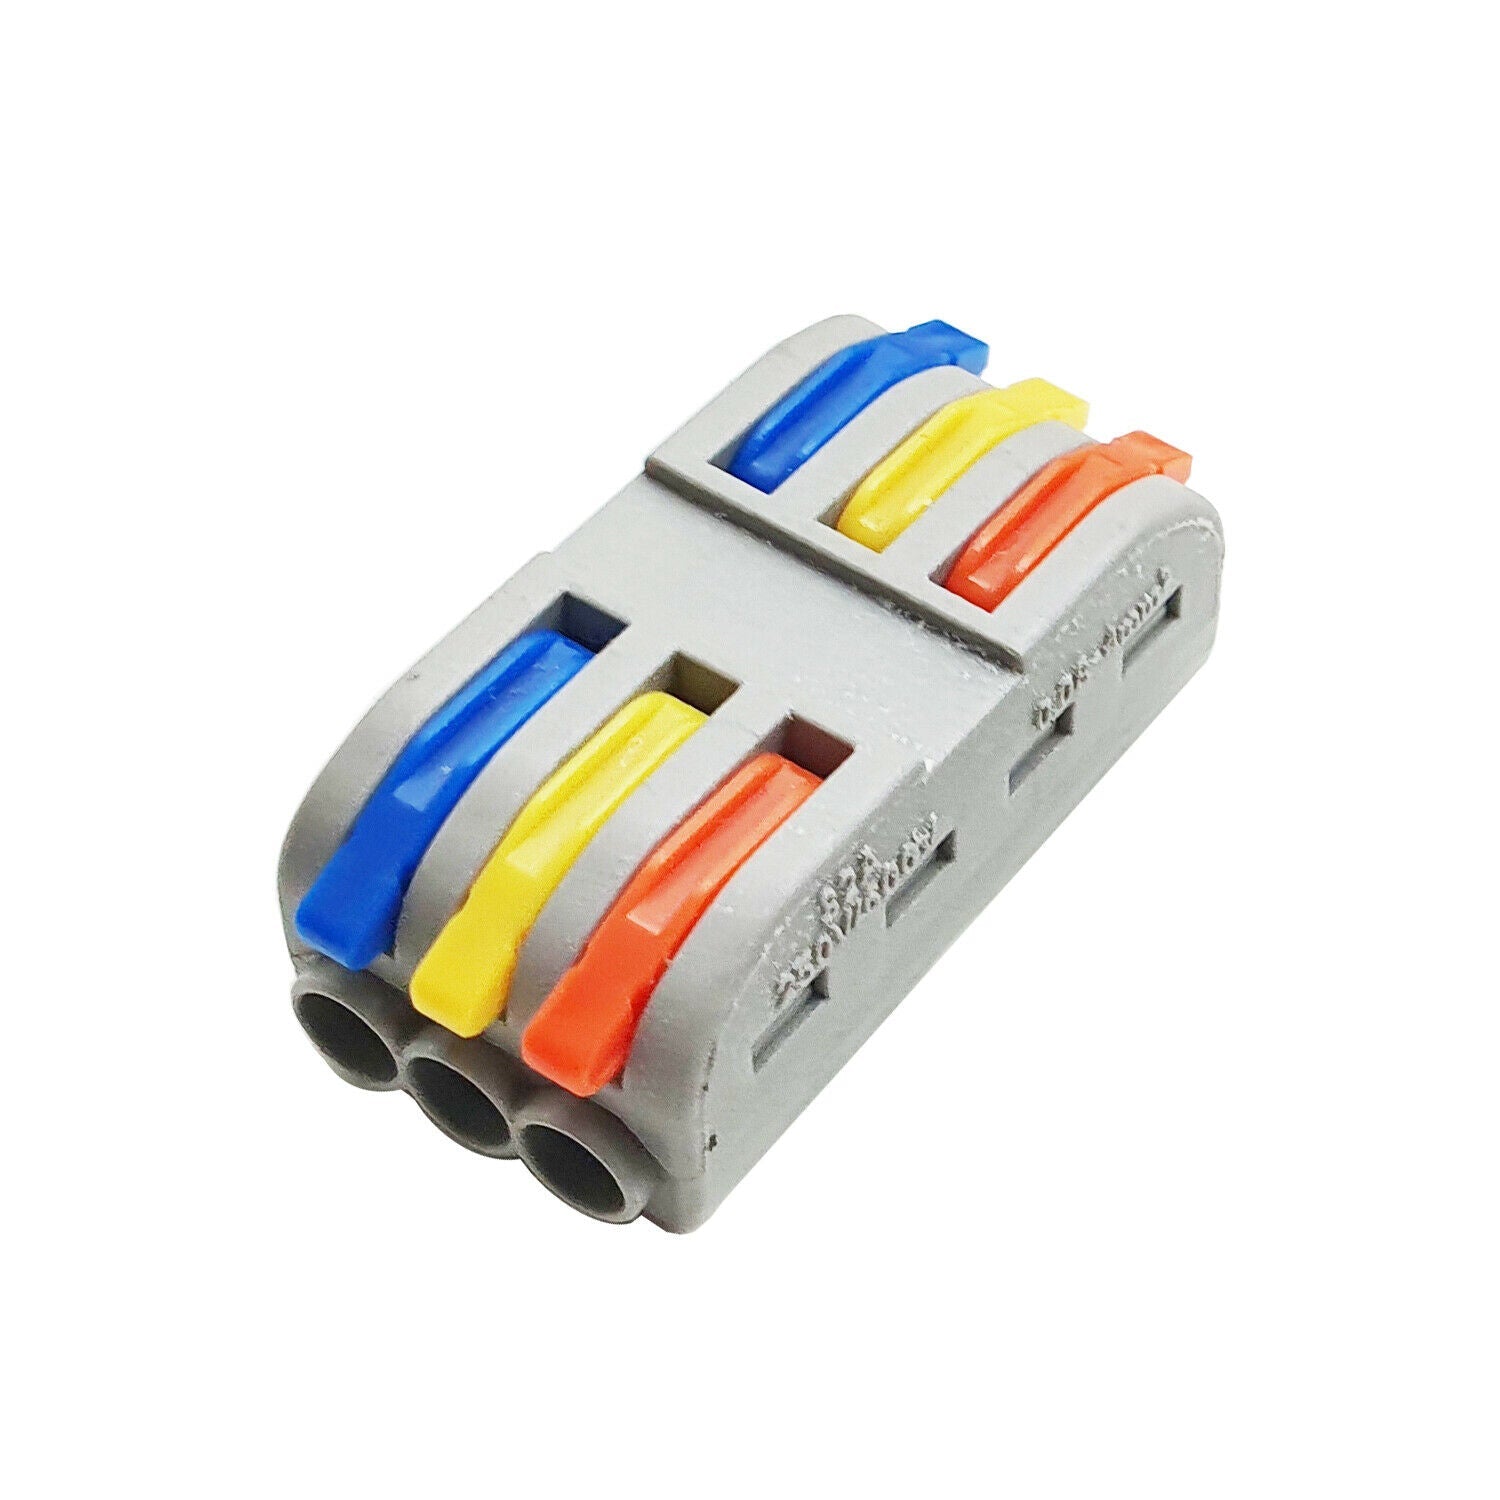 Push-In Wire Connectors 3 Way 24A for Junction Box